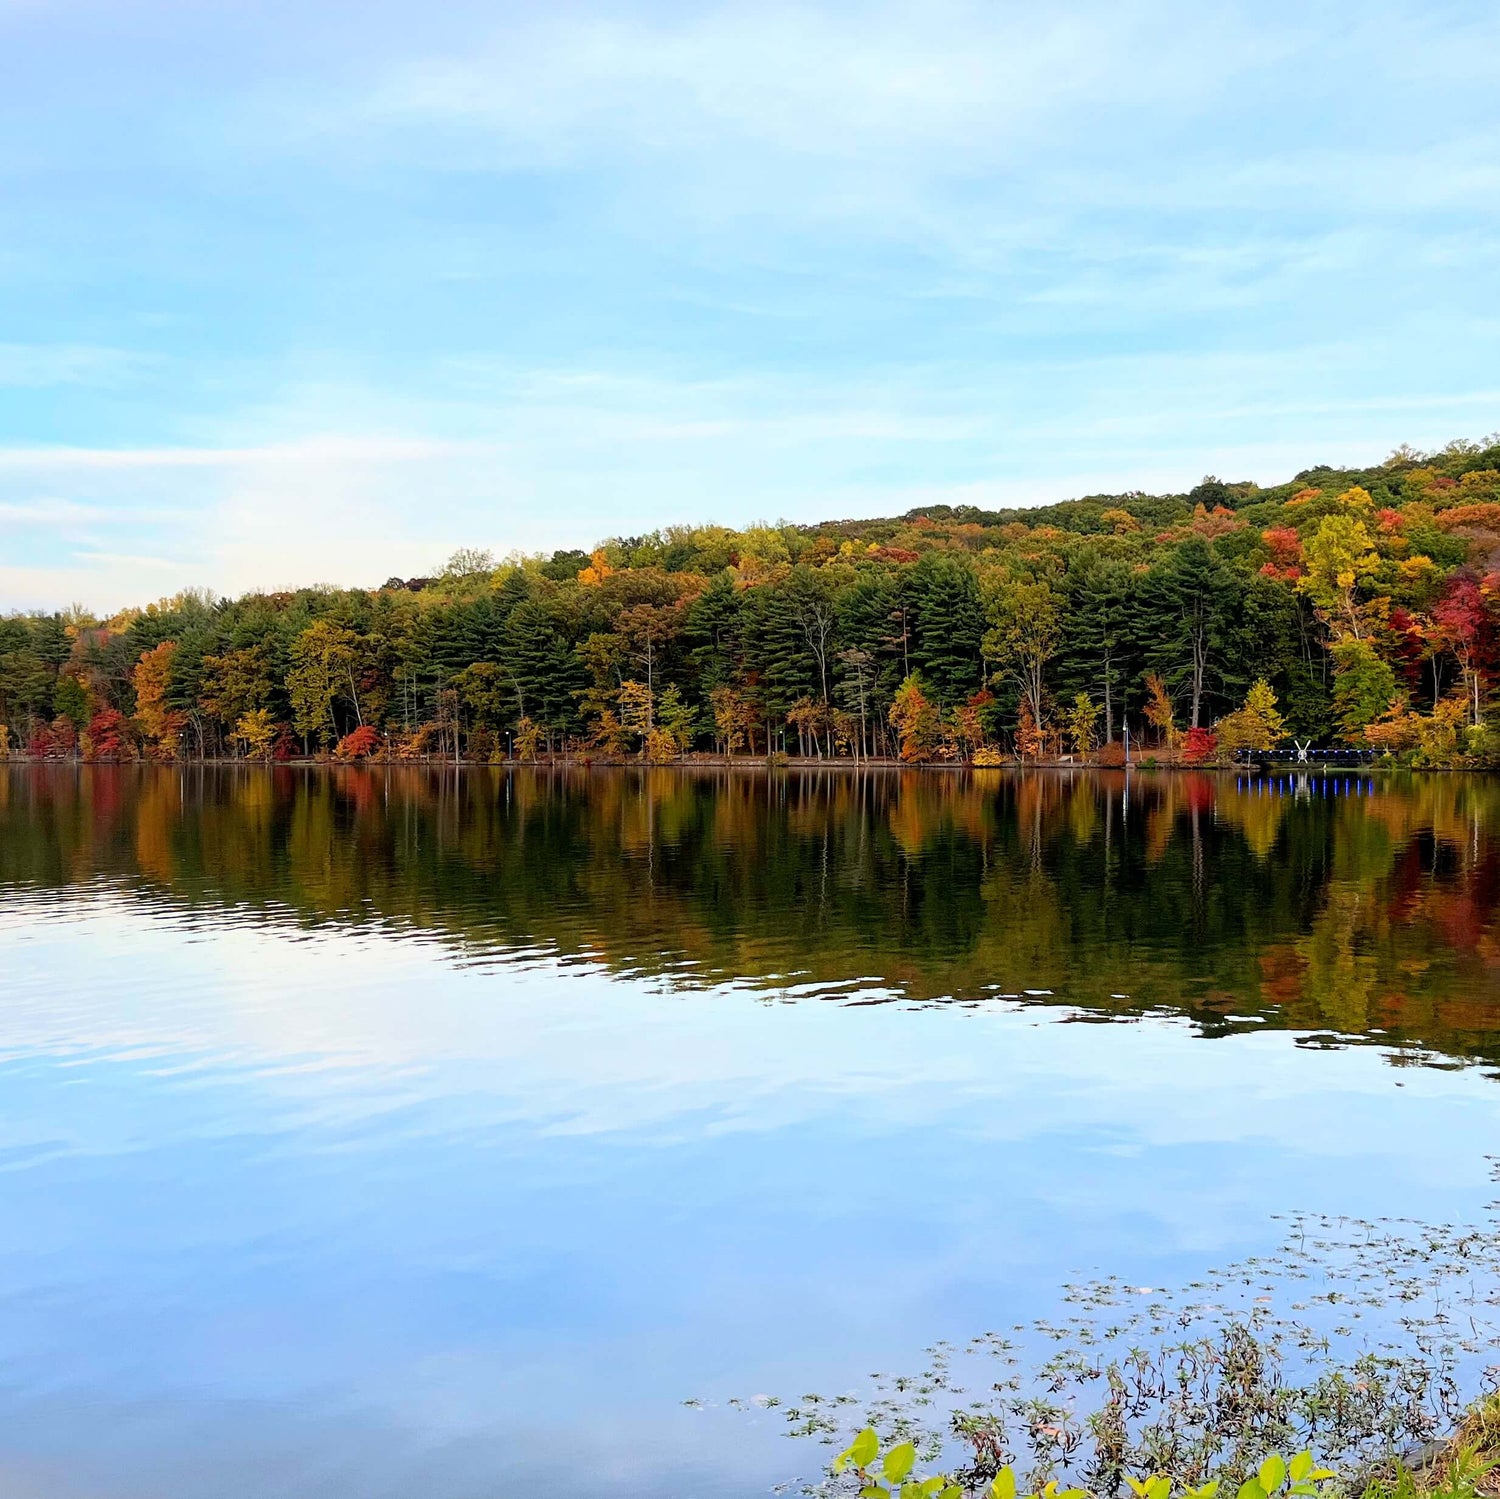 The reservoir of West Orange, New Jersey, dressed in its stunning fall colors.